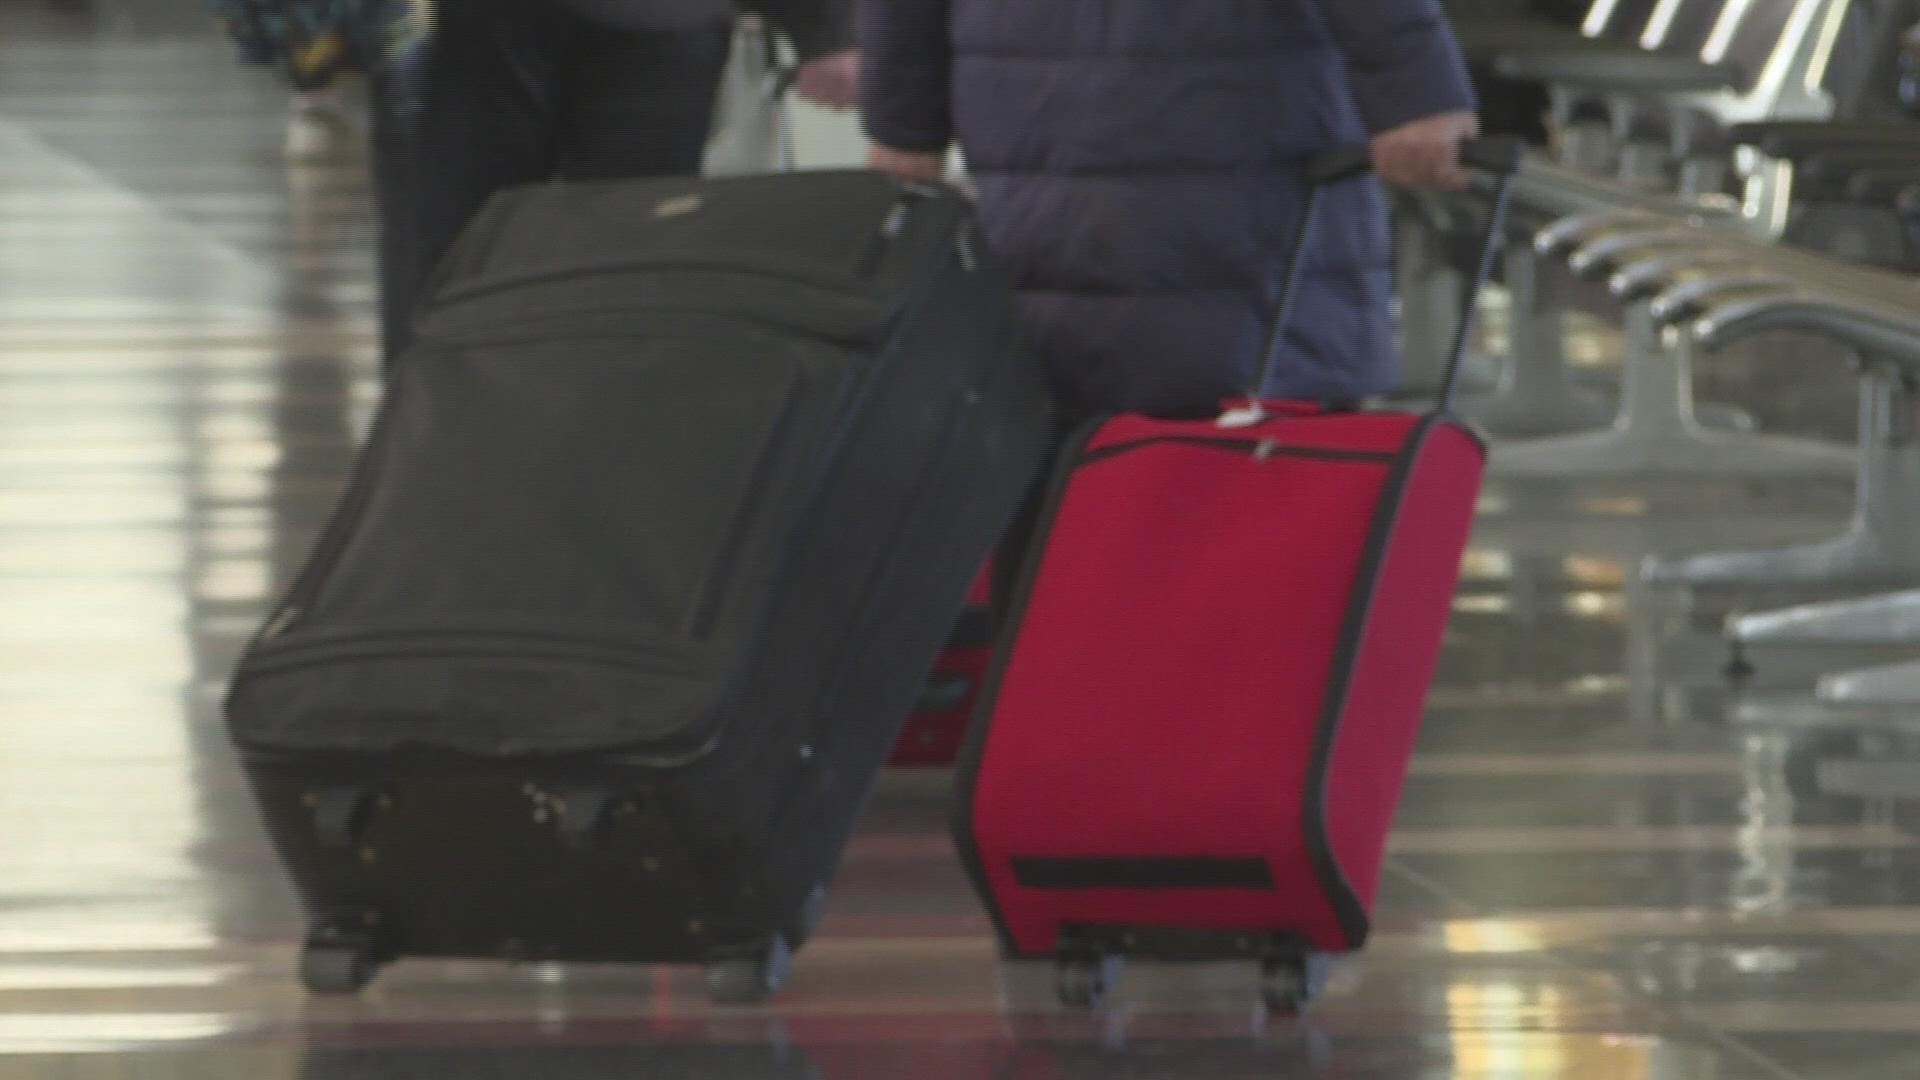 If you're traveling for the holiday, you should hold off on wrapping, according to the TSA.